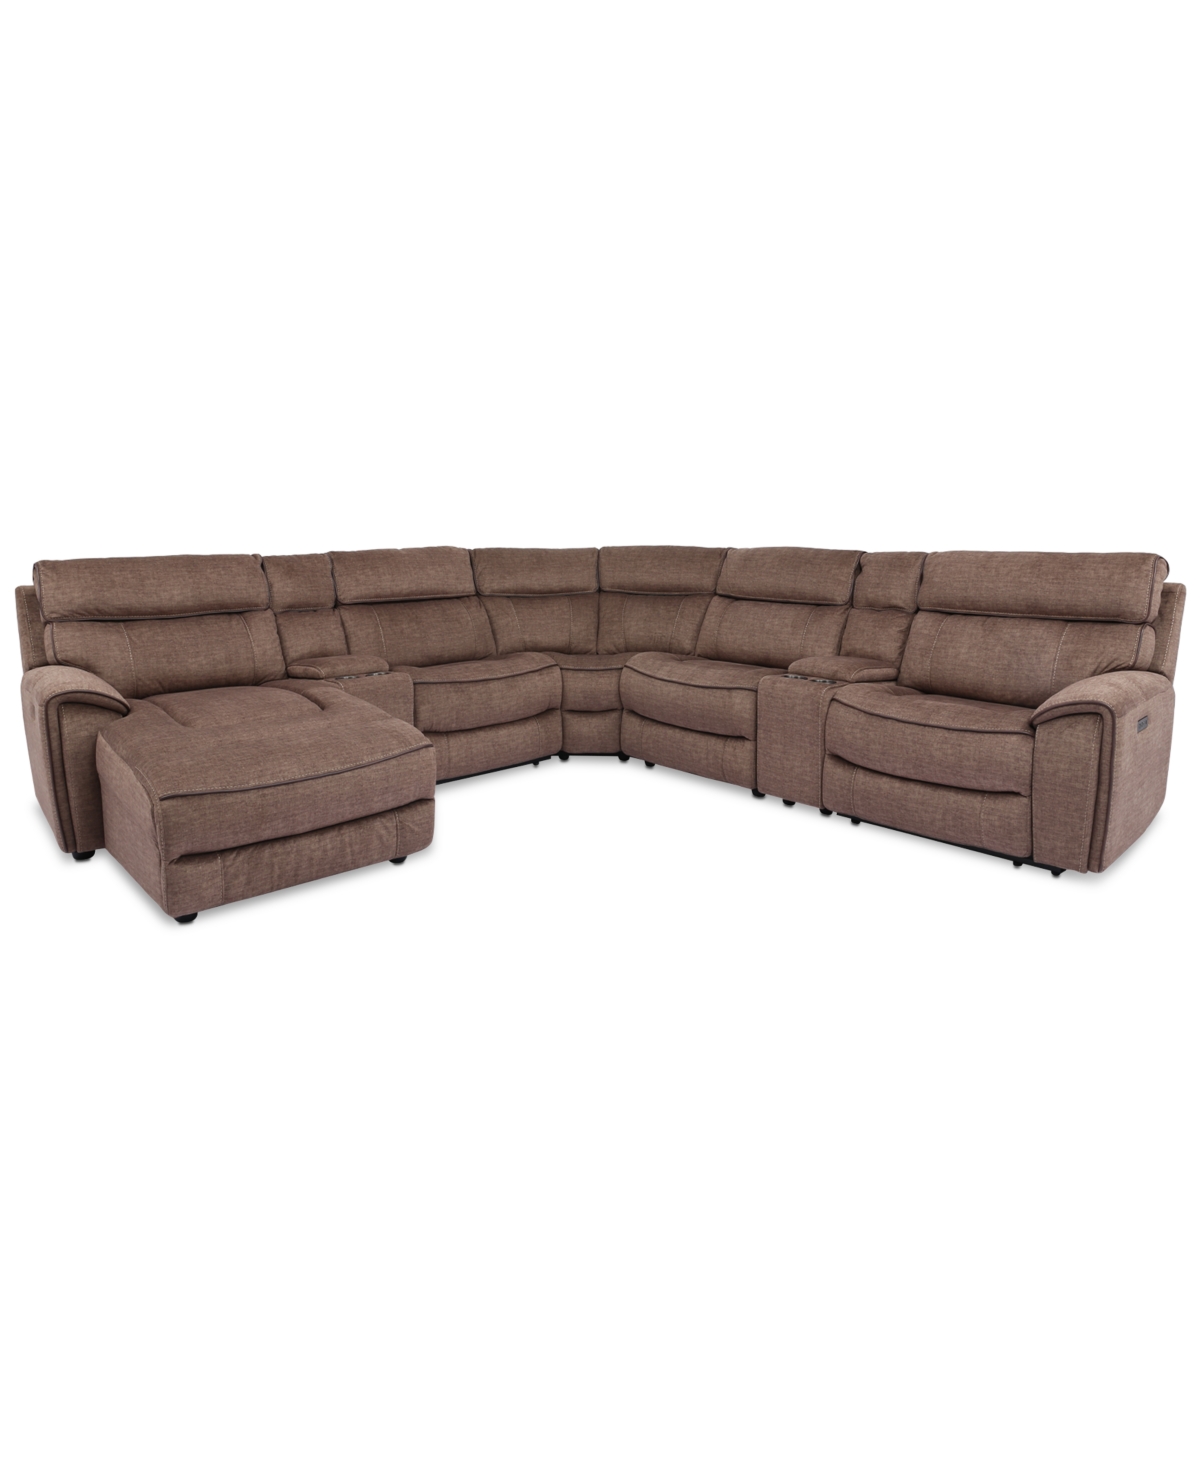 Furniture Hutchenson 7-pc. Fabric Chaise Sectional With 3 Power Recliners And 2 Consoles In Chocolate Brown